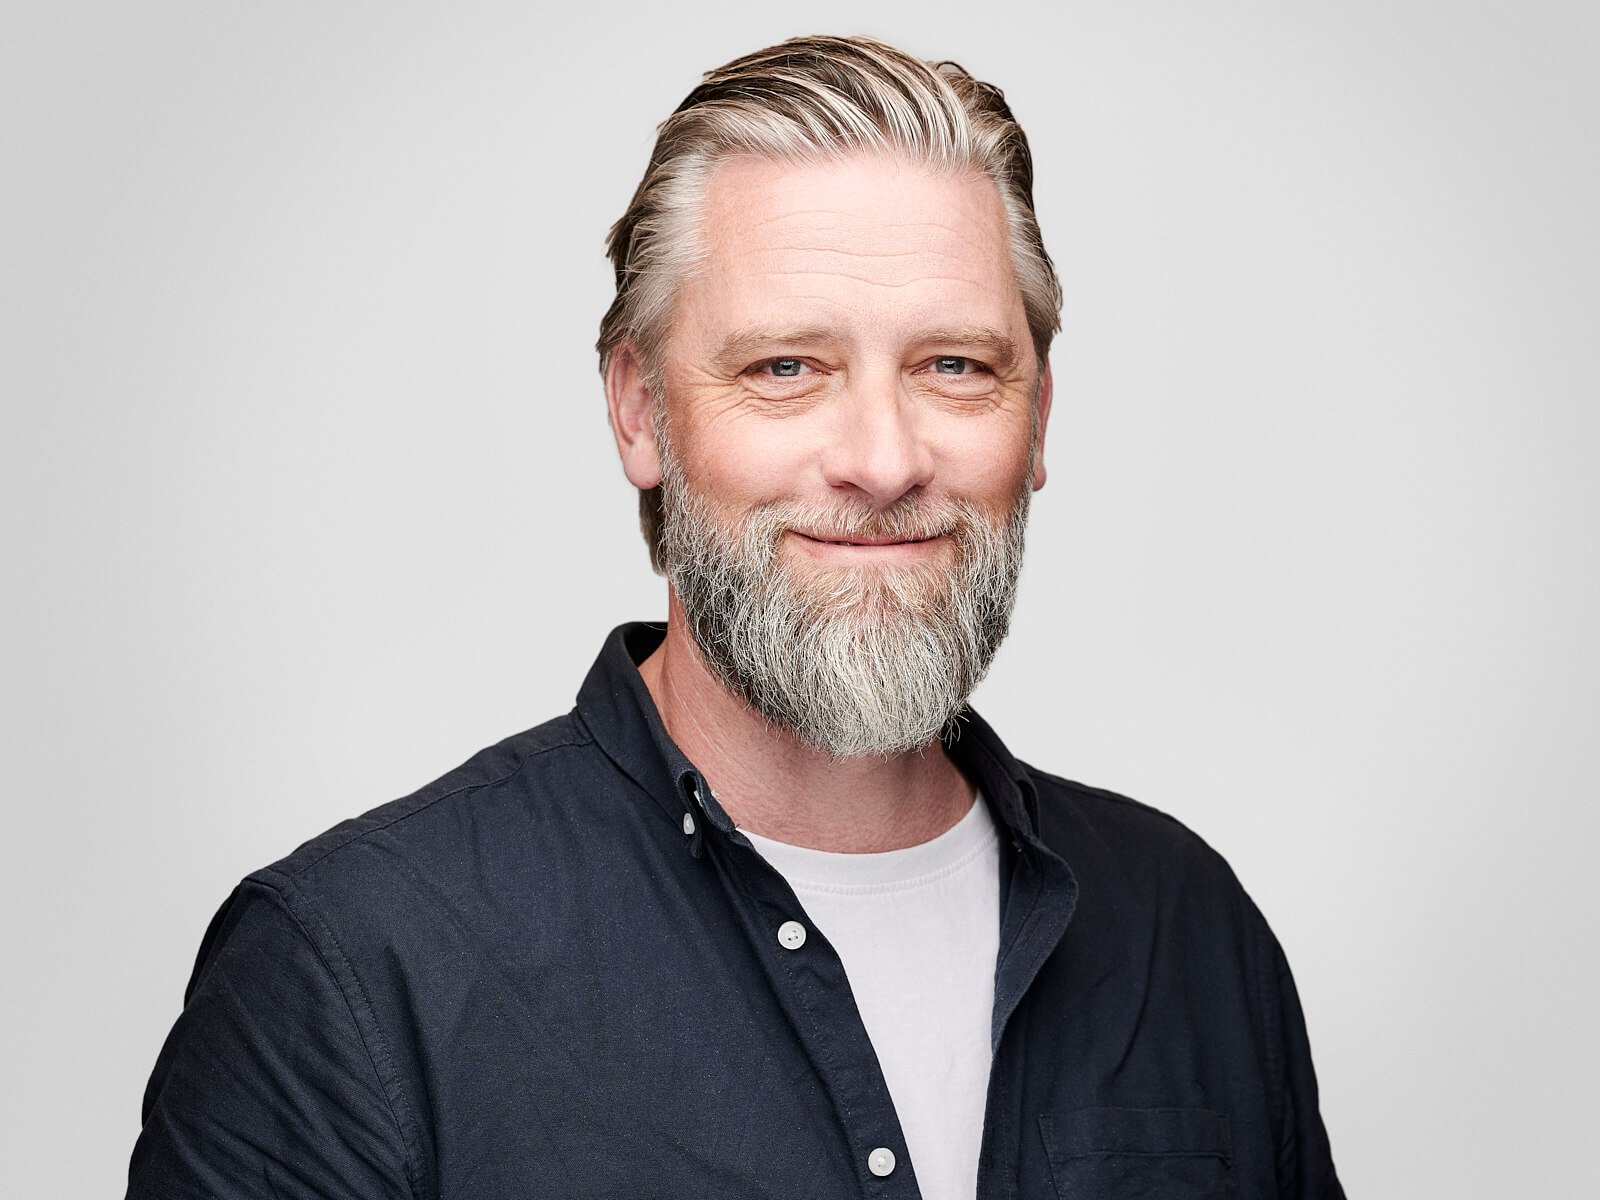 Team headshot of smiling man with grey beard and black shirt against a white background